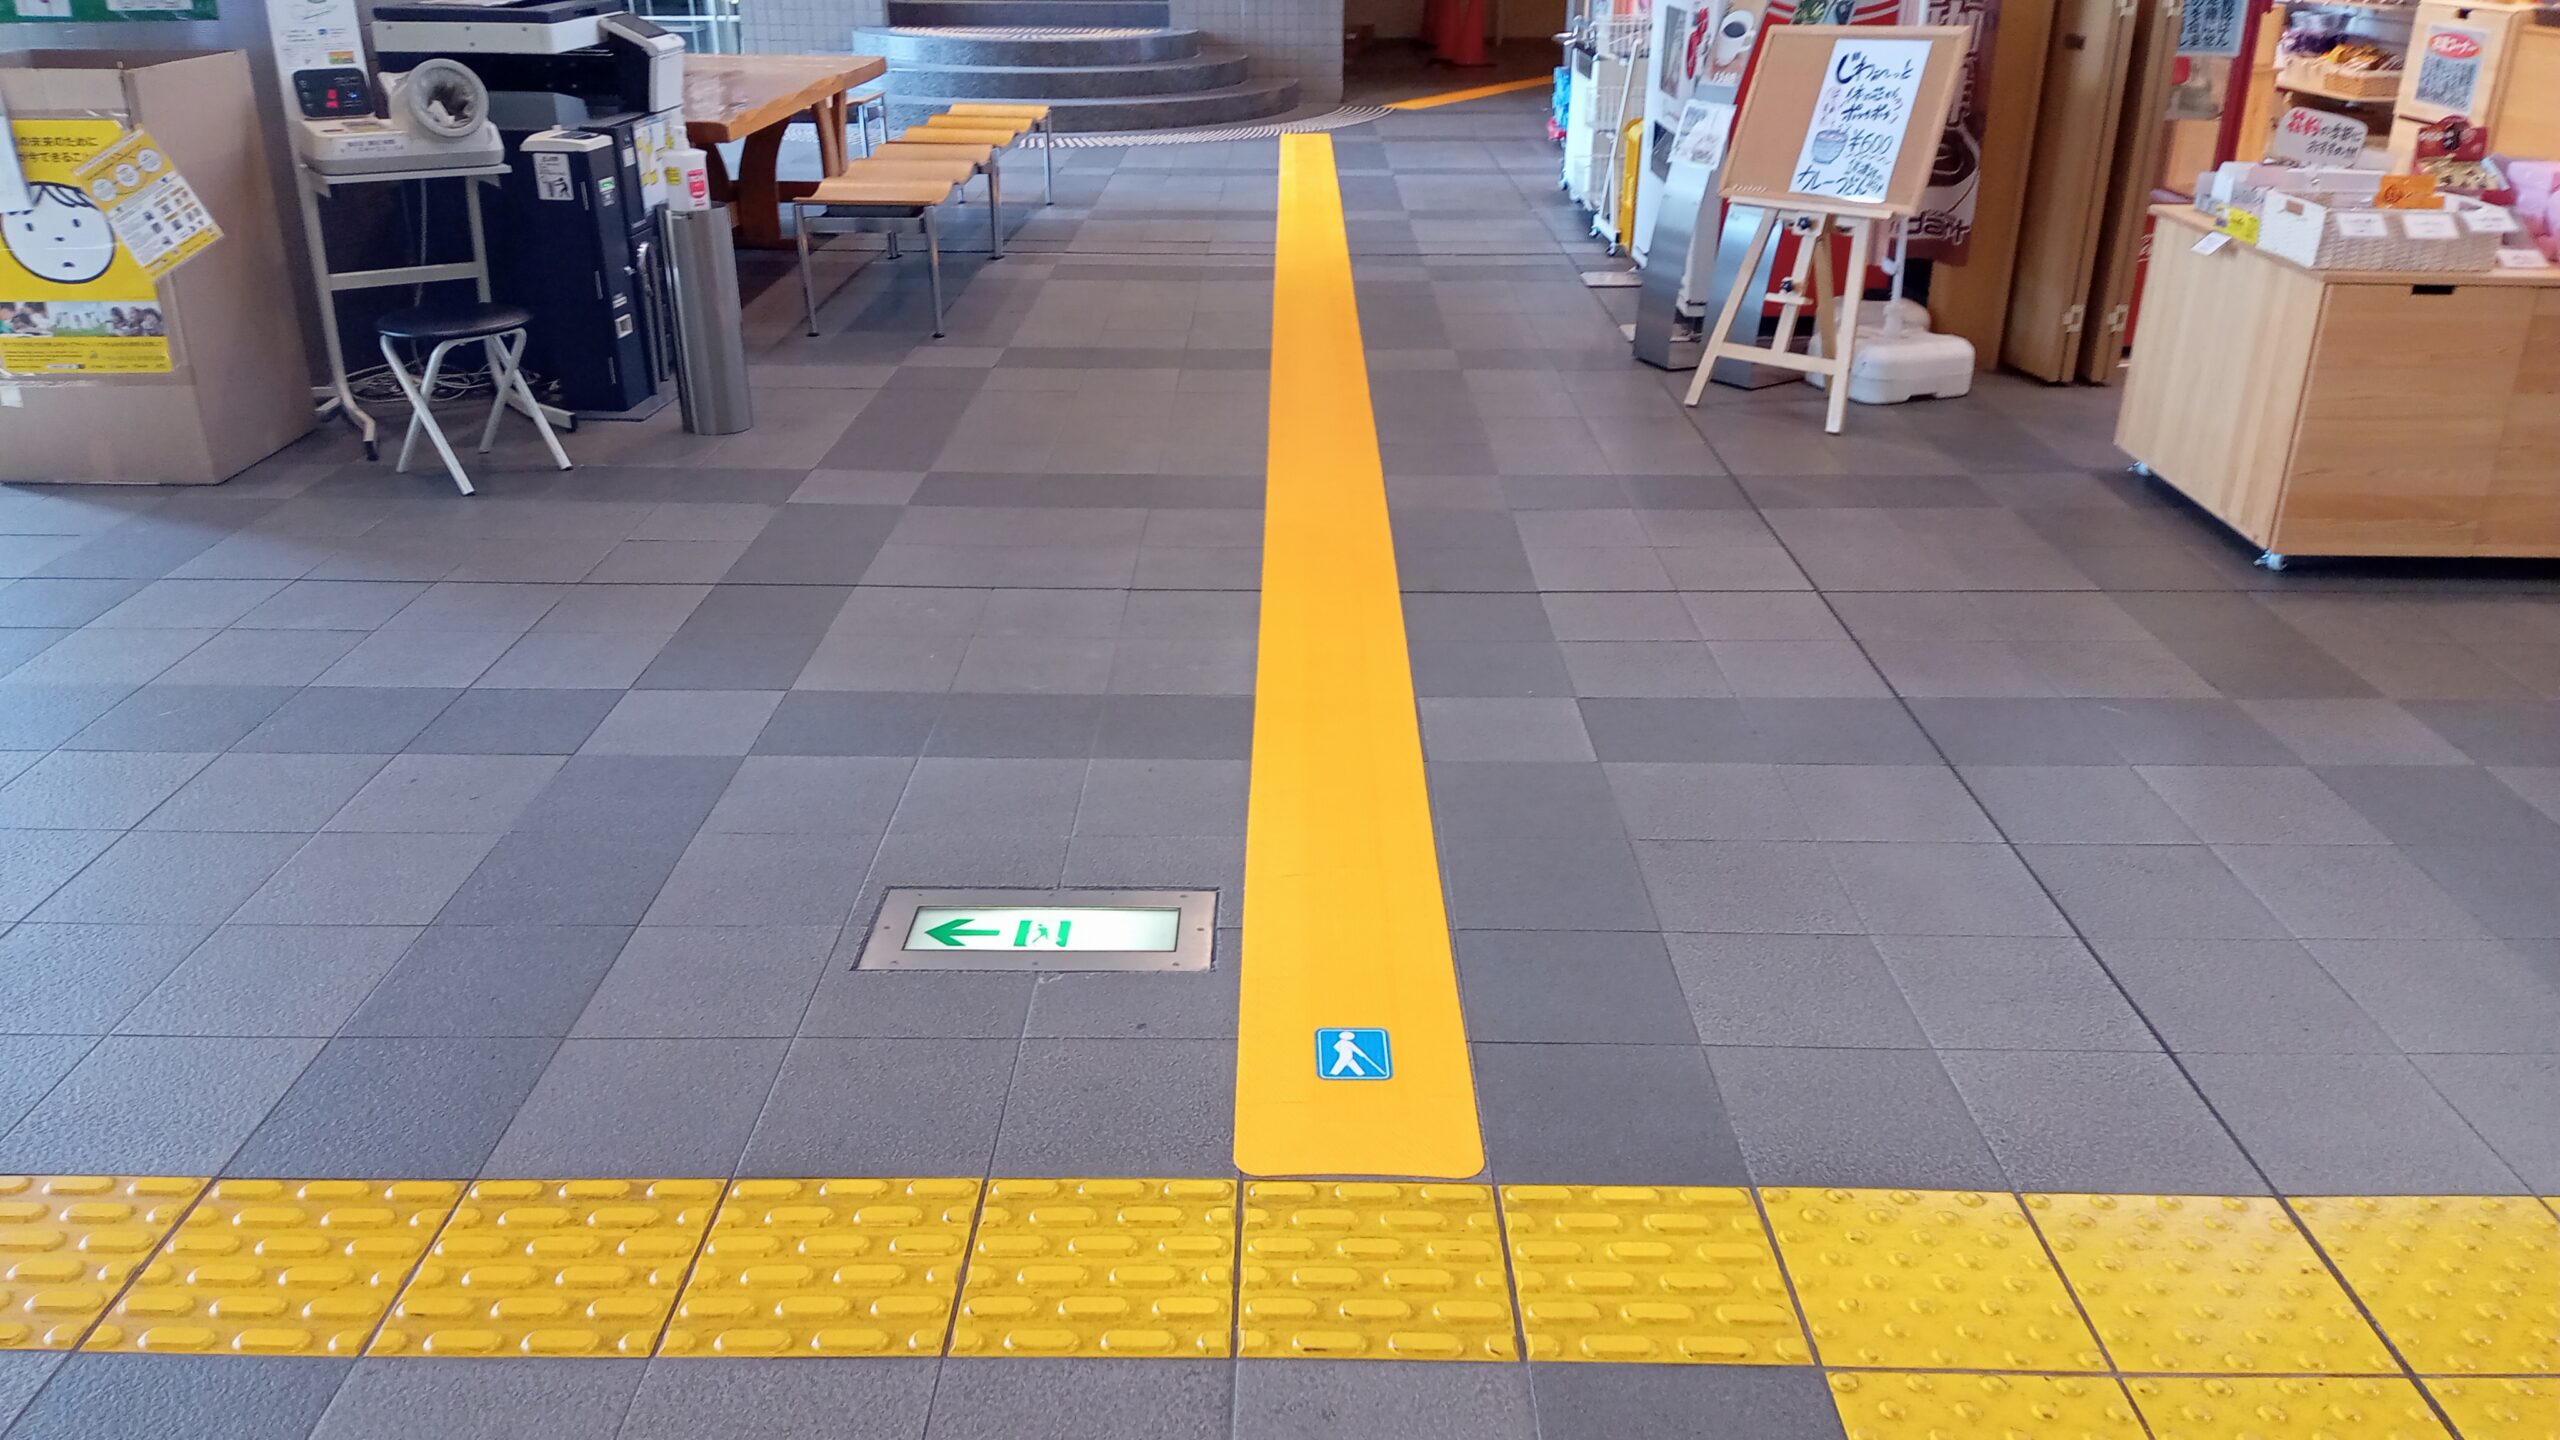 Yellow hodokun is installed vertically from the installed yellow tactile paving towards the stairs.